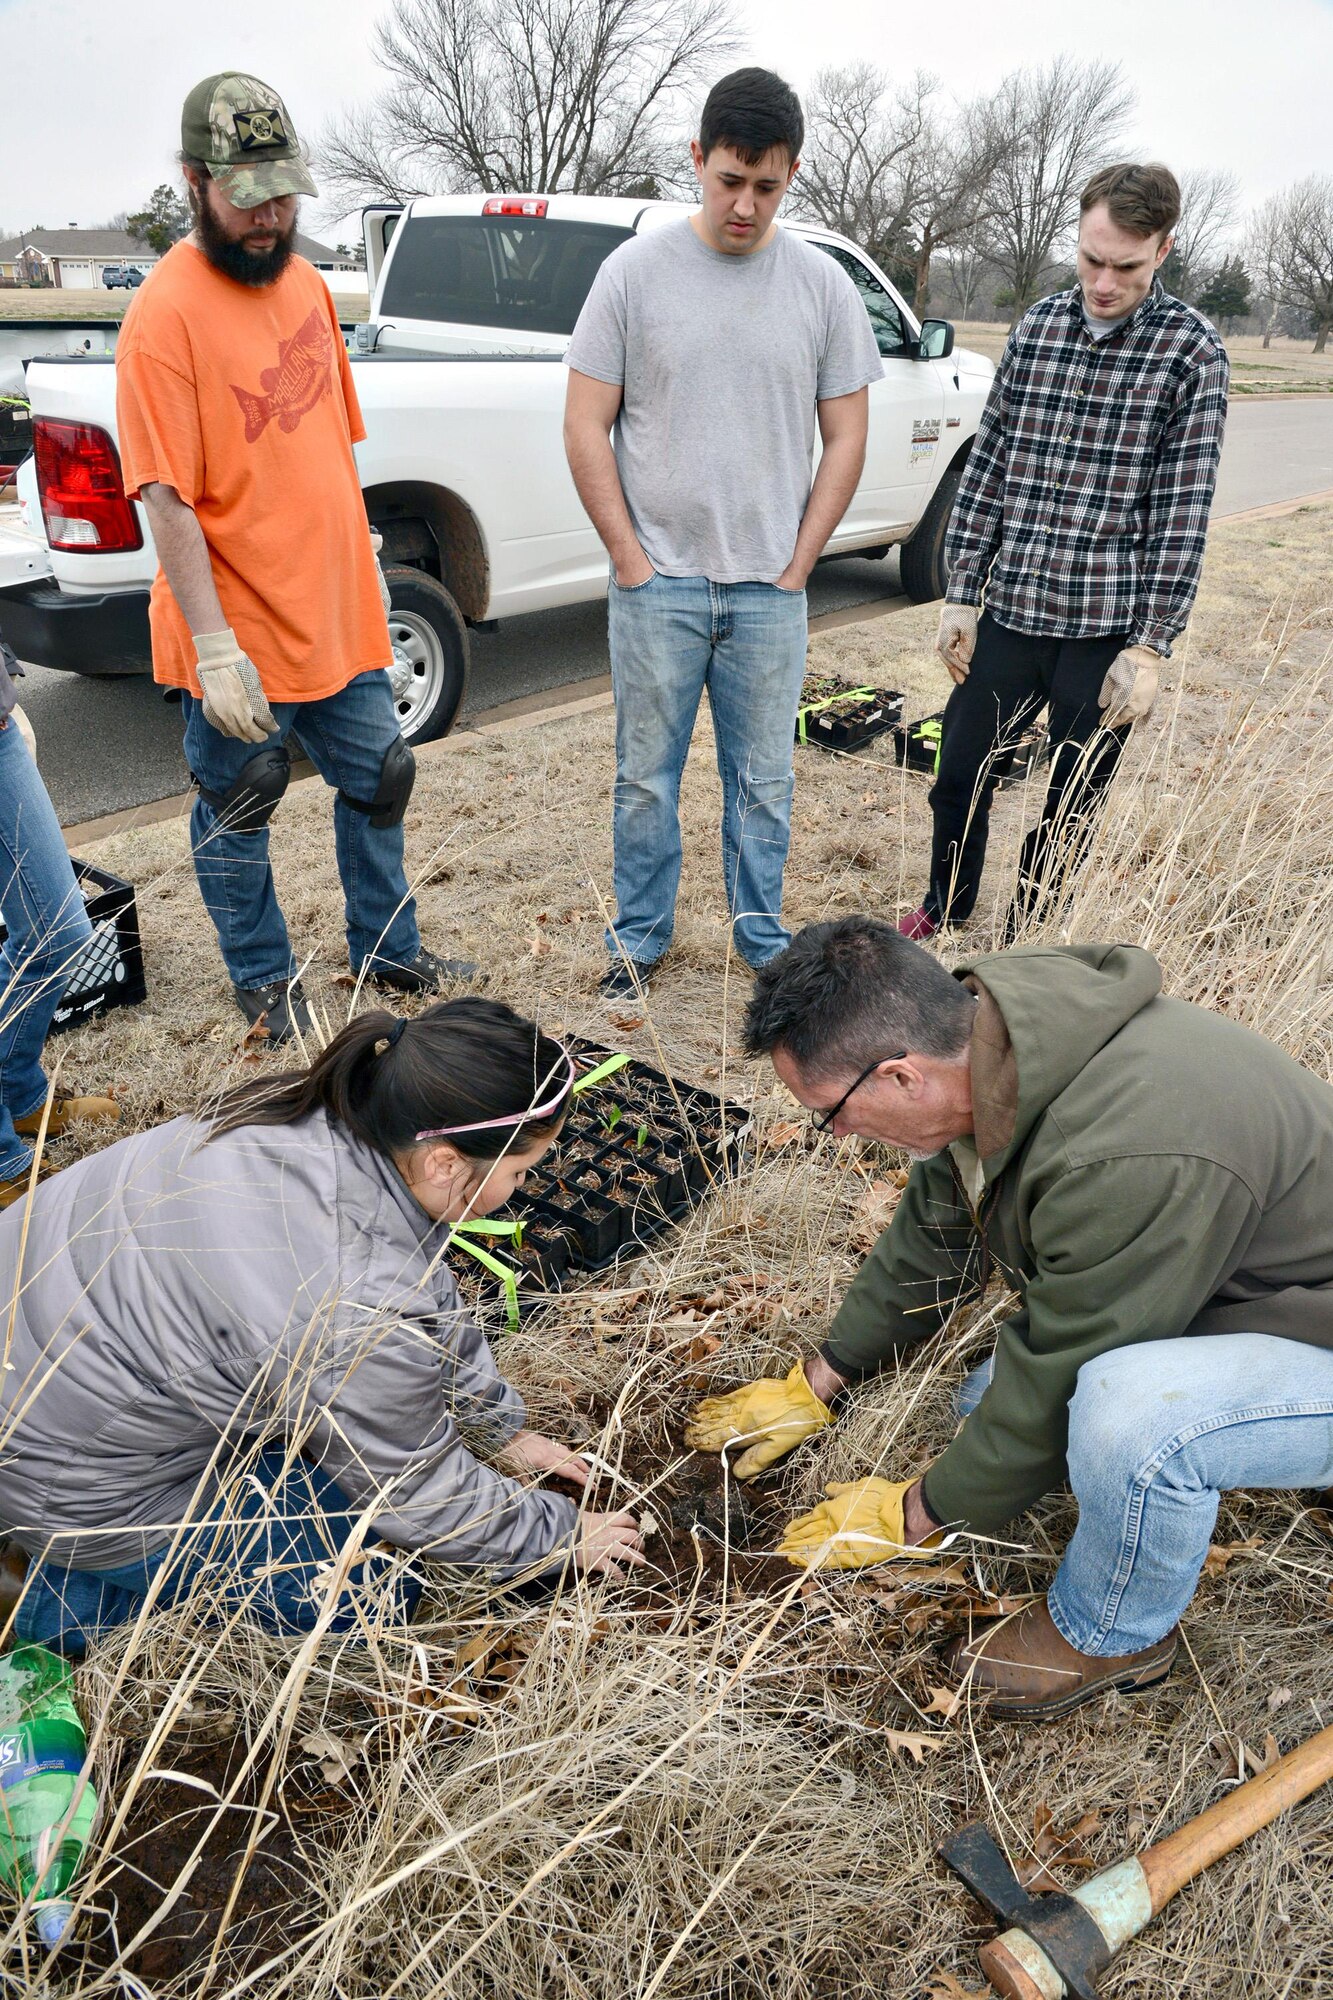 Carlos Carrillo, military spouse, and Senior Airmen Boone Epperson and Tyler Hawke, both with the 72nd Force Support Squadron, from left, watch Donna Nolan, natural resources technician, and John Krupovage, natural resources manager, both with the 72nd Civil Engineering Directorate, as they demonstrate how to correctly plant native wildflowers around the Crutcho Creek area west of the Tinker Club. The flowers are expected to fully develop within the next two to three years. (Air Force photo by Kelly White)